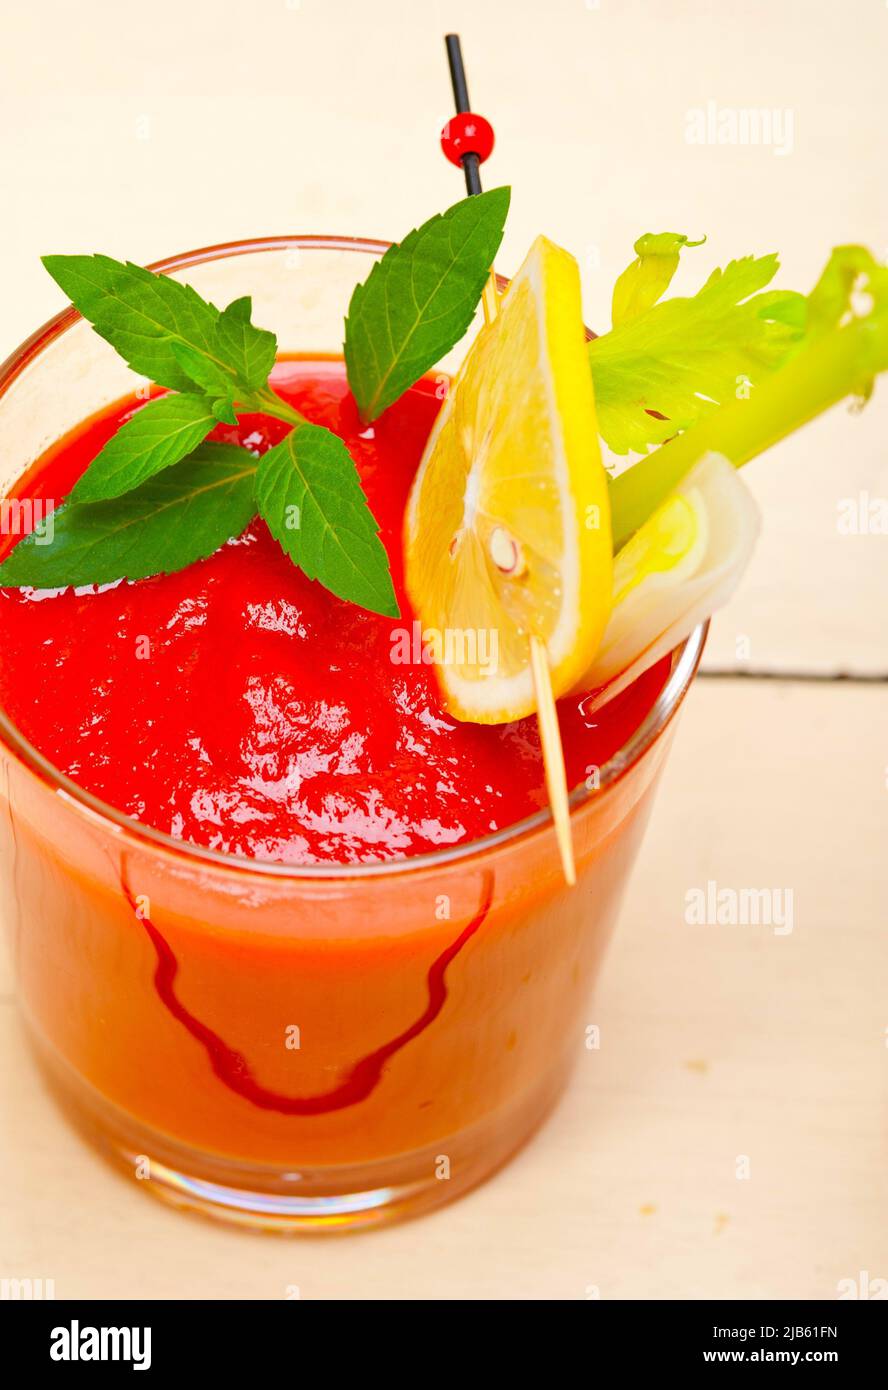 fresh tomato juice gazpacho soup on a glass over white wood table. Stock Photo